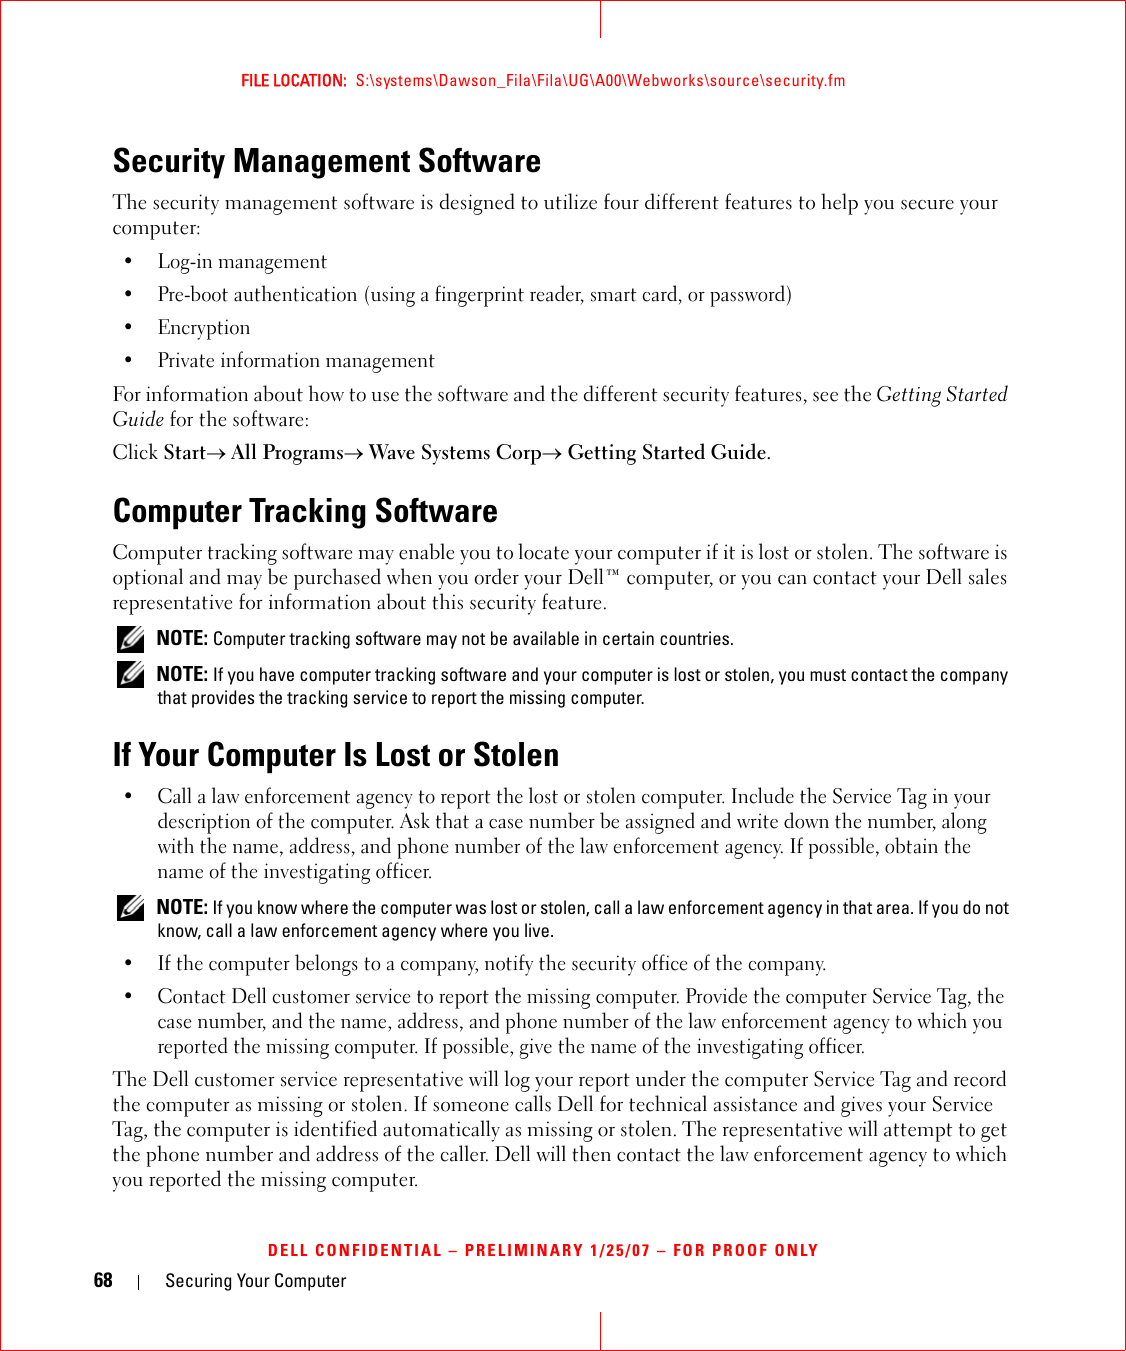 68 Securing Your ComputerFILE LOCATION:  S:\systems\Dawson_Fila\Fila\UG\A00\Webworks\source\security.fmDELL CONFIDENTIAL – PRELIMINARY 1/25/07 – FOR PROOF ONLYSecurity Management SoftwareThe security management software is designed to utilize four different features to help you secure your computer:• Log-in management• Pre-boot authentication (using a fingerprint reader, smart card, or password)•Encryption• Private information managementFor information about how to use the software and the different security features, see the Getting Started Guide for the software: Click Start→ All Programs→ Wave Systems Corp→ Getting Started Guide.Computer Tracking SoftwareComputer tracking software may enable you to locate your computer if it is lost or stolen. The software is optional and may be purchased when you order your Dell™ computer, or you can contact your Dell sales representative for information about this security feature. NOTE: Computer tracking software may not be available in certain countries. NOTE: If you have computer tracking software and your computer is lost or stolen, you must contact the company that provides the tracking service to report the missing computer.If Your Computer Is Lost or Stolen• Call a law enforcement agency to report the lost or stolen computer. Include the Service Tag in your description of the computer. Ask that a case number be assigned and write down the number, along with the name, address, and phone number of the law enforcement agency. If possible, obtain the name of the investigating officer. NOTE: If you know where the computer was lost or stolen, call a law enforcement agency in that area. If you do not know, call a law enforcement agency where you live.• If the computer belongs to a company, notify the security office of the company.• Contact Dell customer service to report the missing computer. Provide the computer Service Tag, the case number, and the name, address, and phone number of the law enforcement agency to which you reported the missing computer. If possible, give the name of the investigating officer.The Dell customer service representative will log your report under the computer Service Tag and record the computer as missing or stolen. If someone calls Dell for technical assistance and gives your Service Tag, the computer is identified automatically as missing or stolen. The representative will attempt to get the phone number and address of the caller. Dell will then contact the law enforcement agency to which you reported the missing computer.